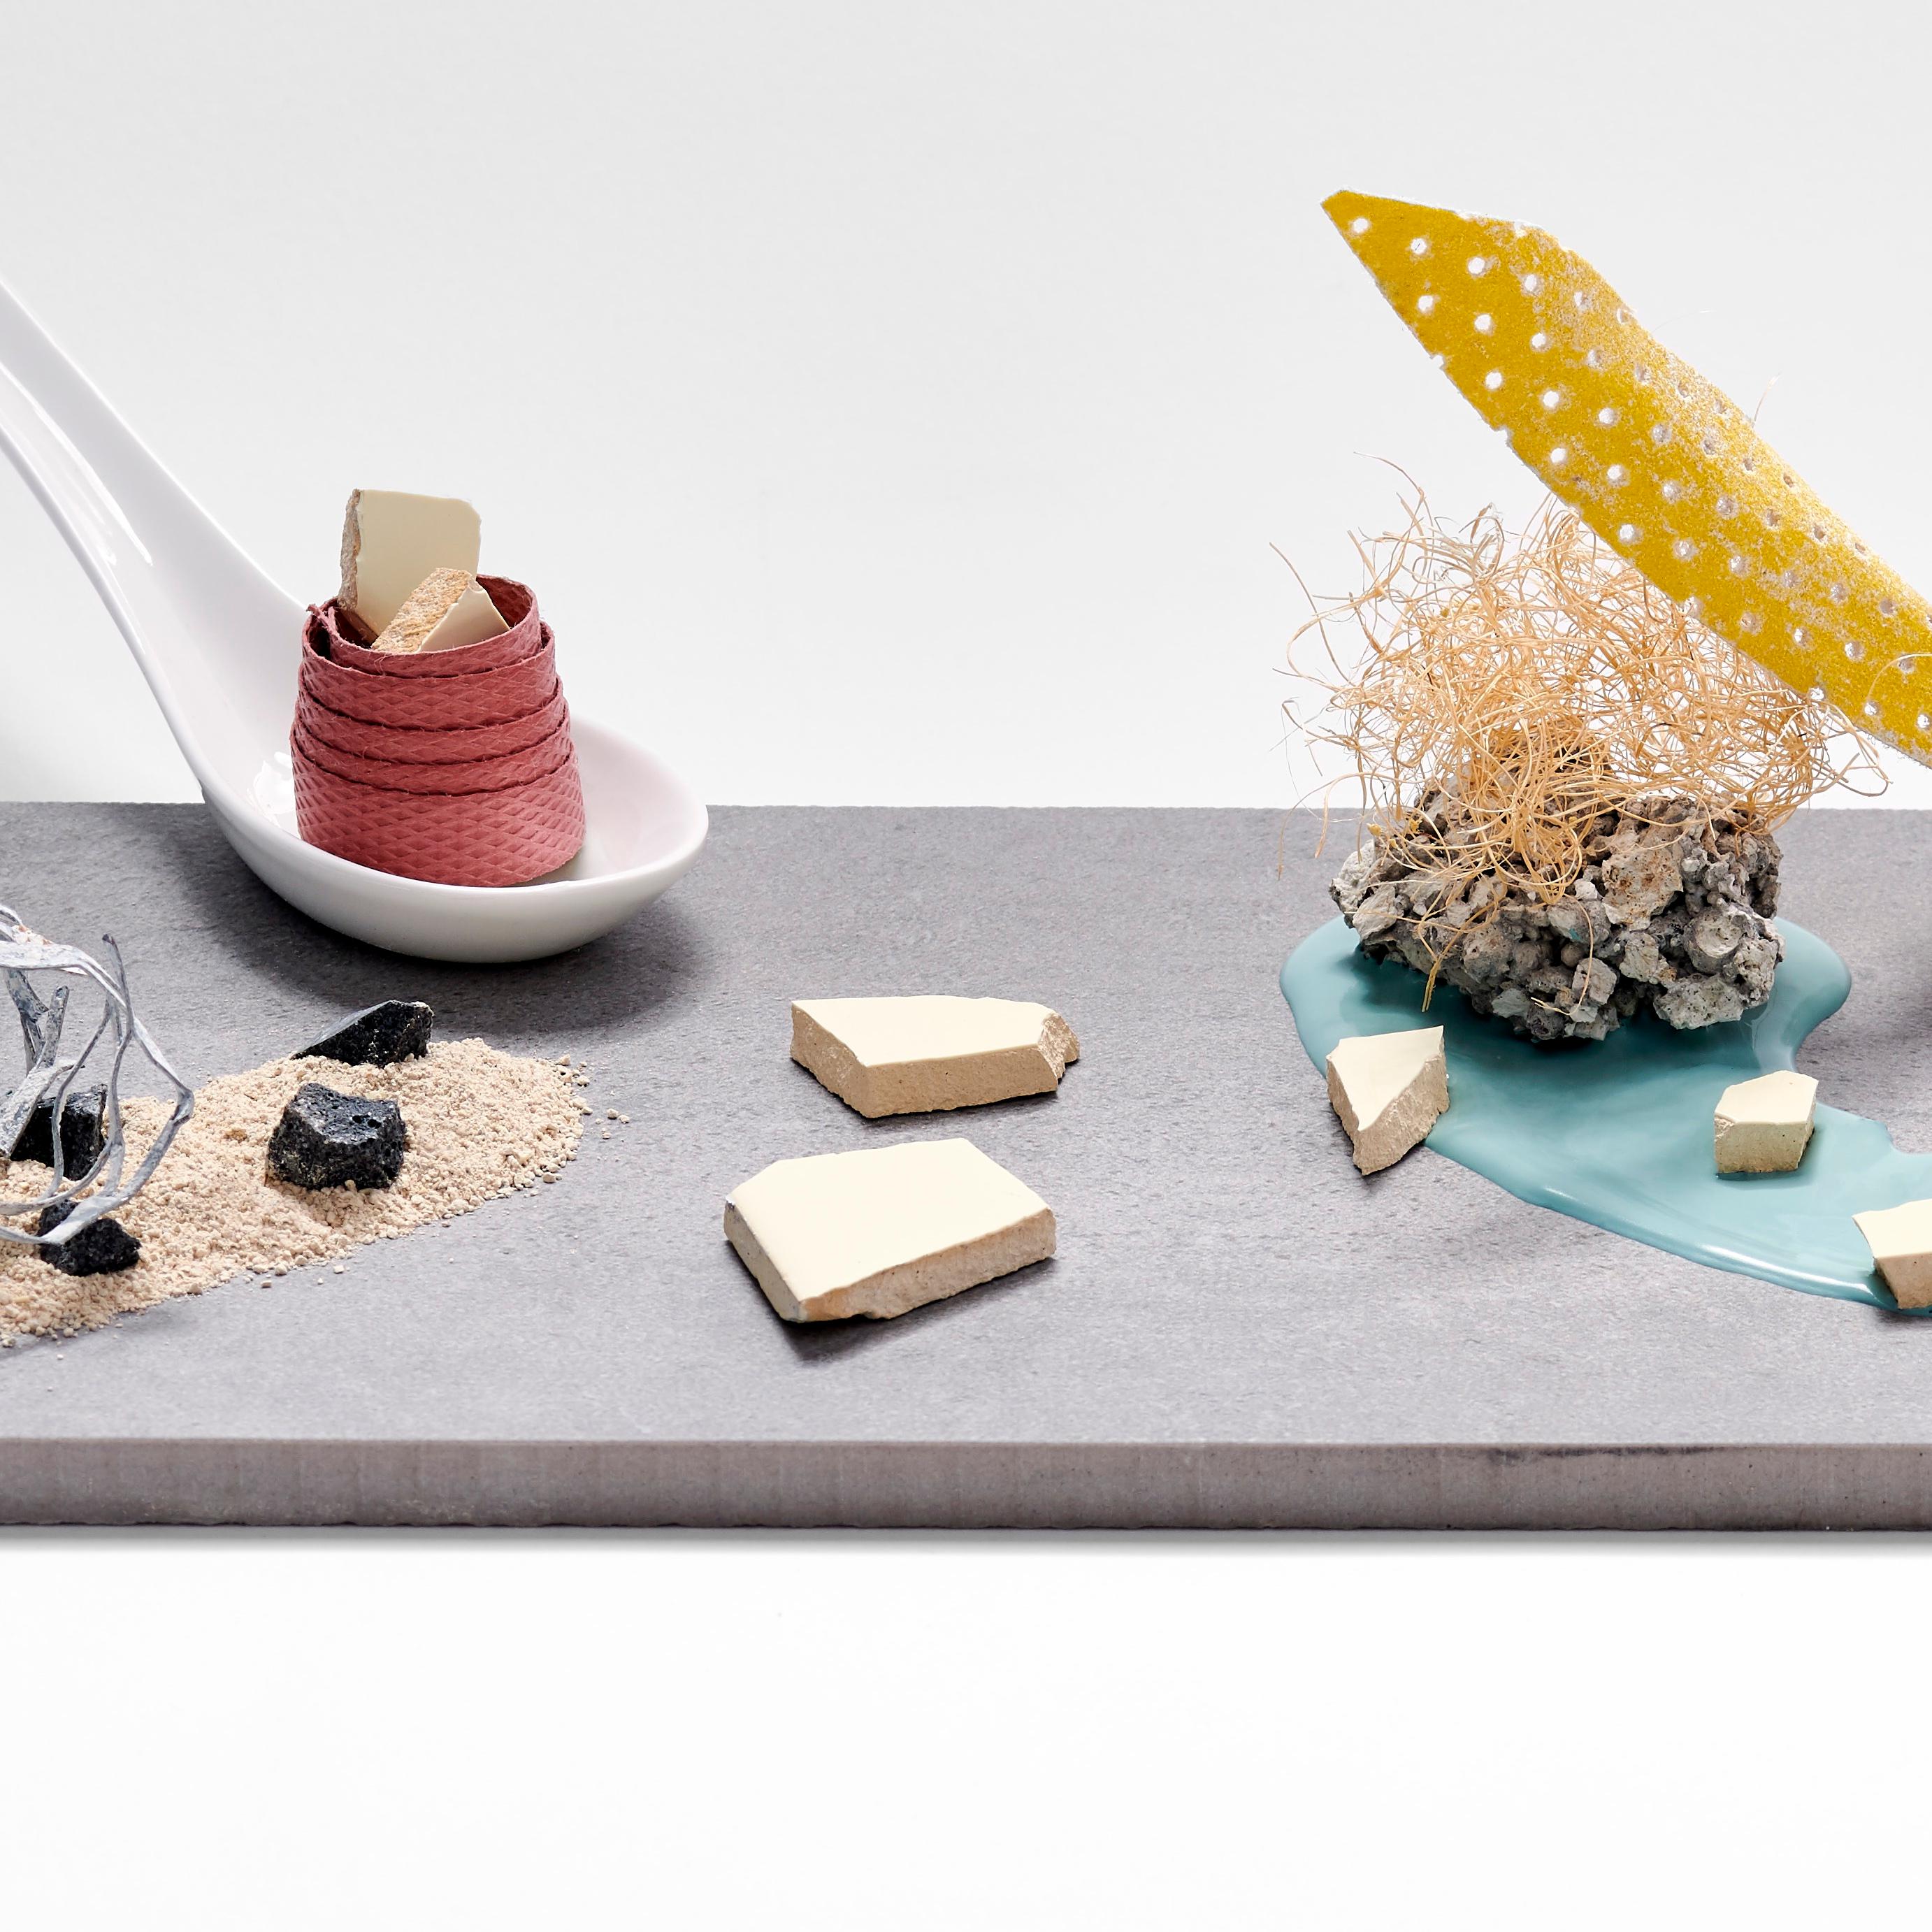 Photograph on C print.
The cheese platter is made from rest over waste ingredients found in on a building site in Rotterdam. Rubdish is a conceptual visualization of waste finding it’sway back onto your plate. It is the transformation of rubbish